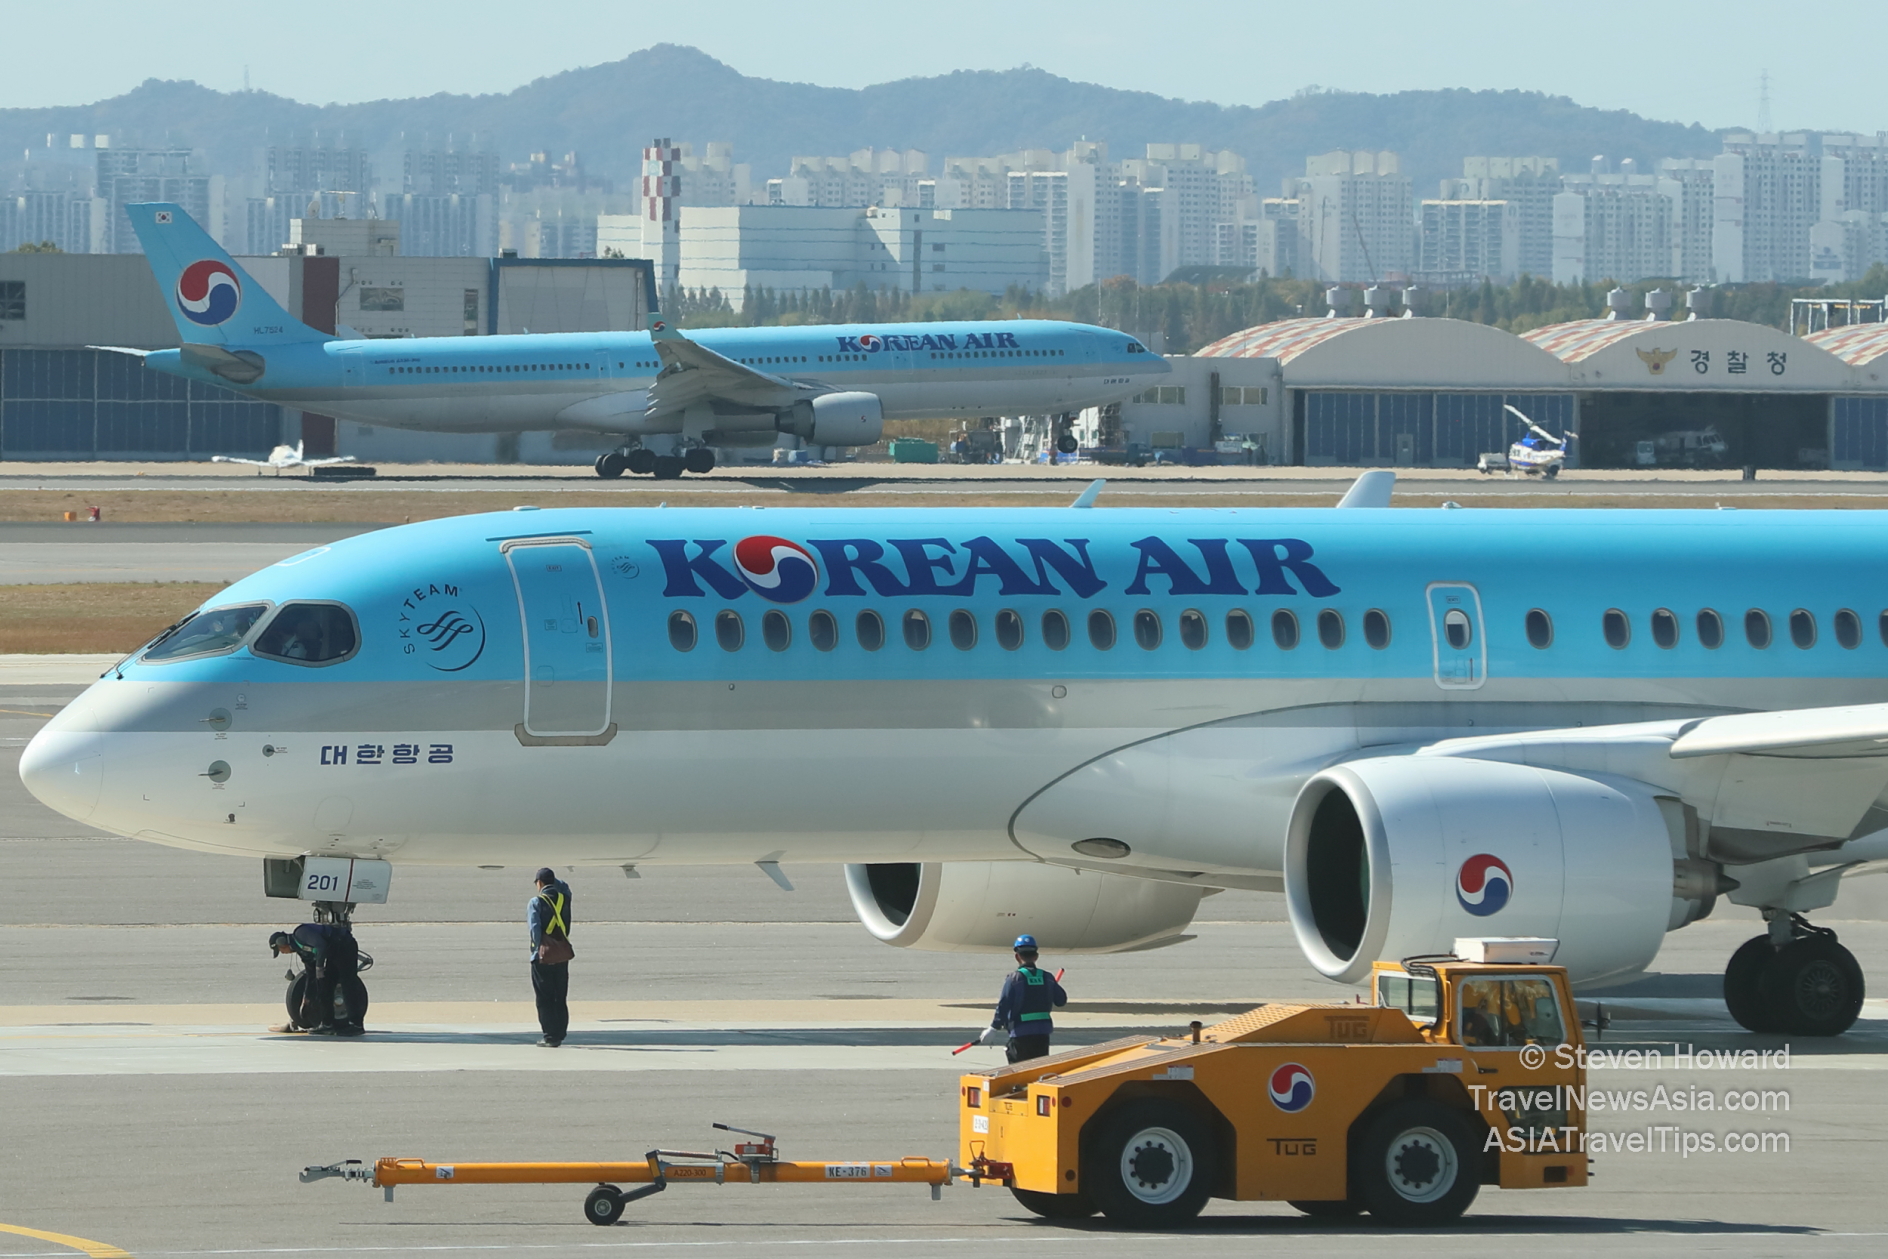 Korean Air aircraft. Picture by Steven Howard of TravelNewsAsia.com Click to enlarge.